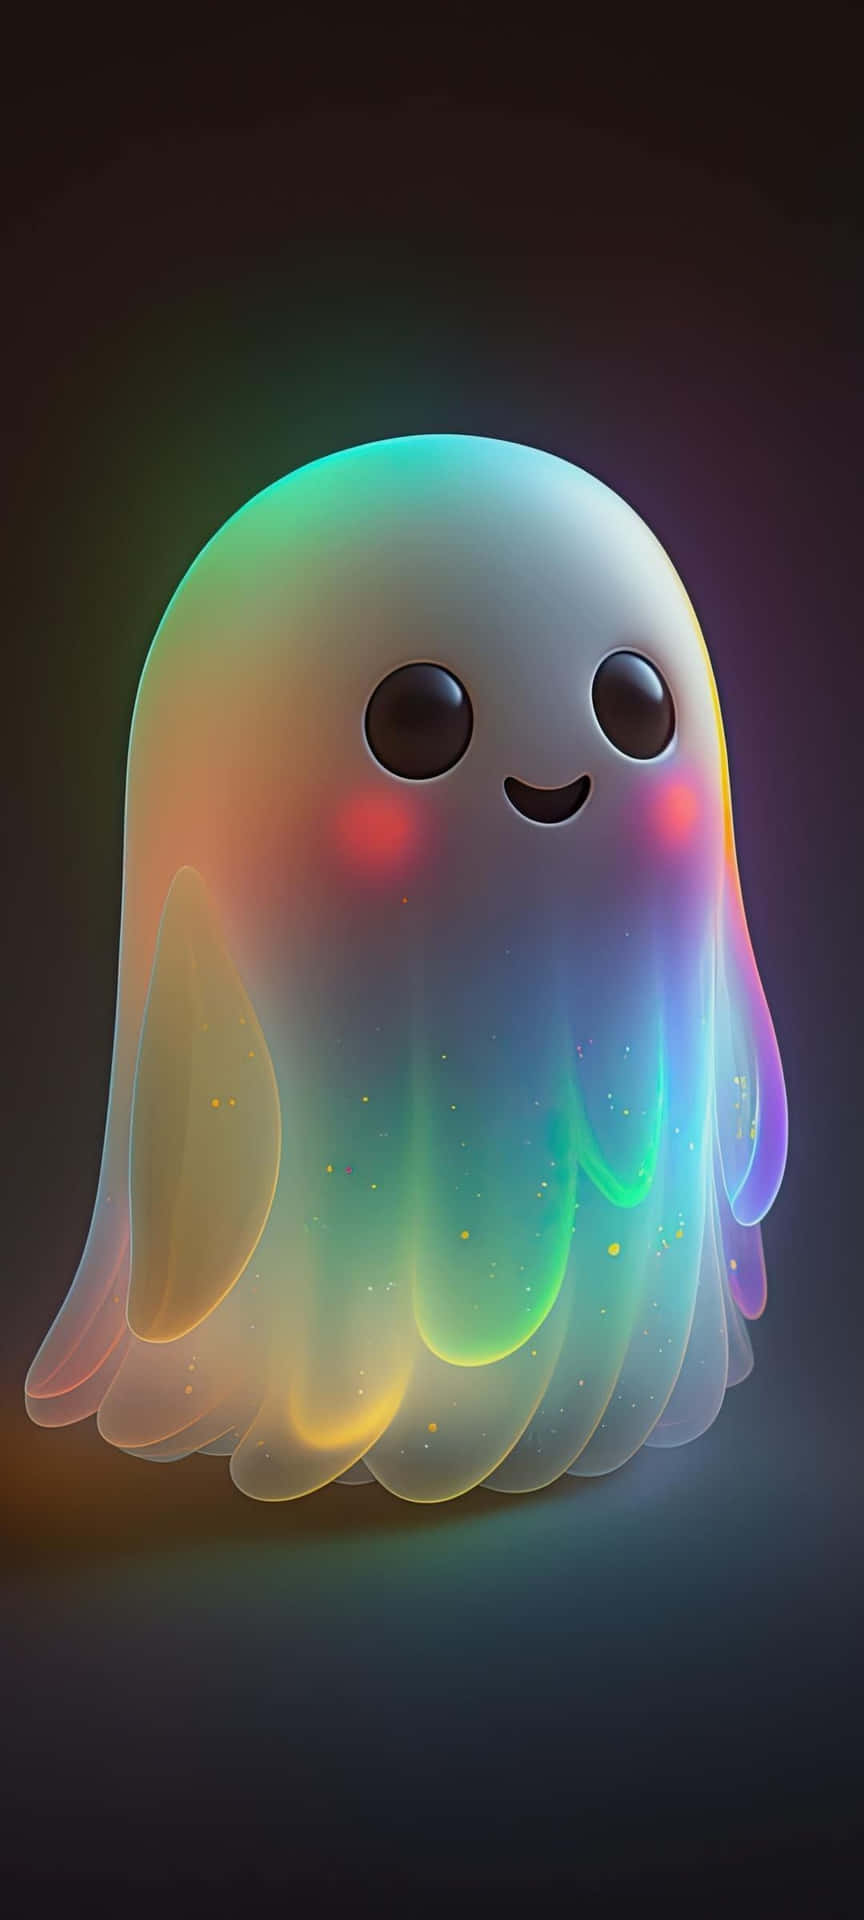 Colorful Cute Ghost Illustration Wallpaper